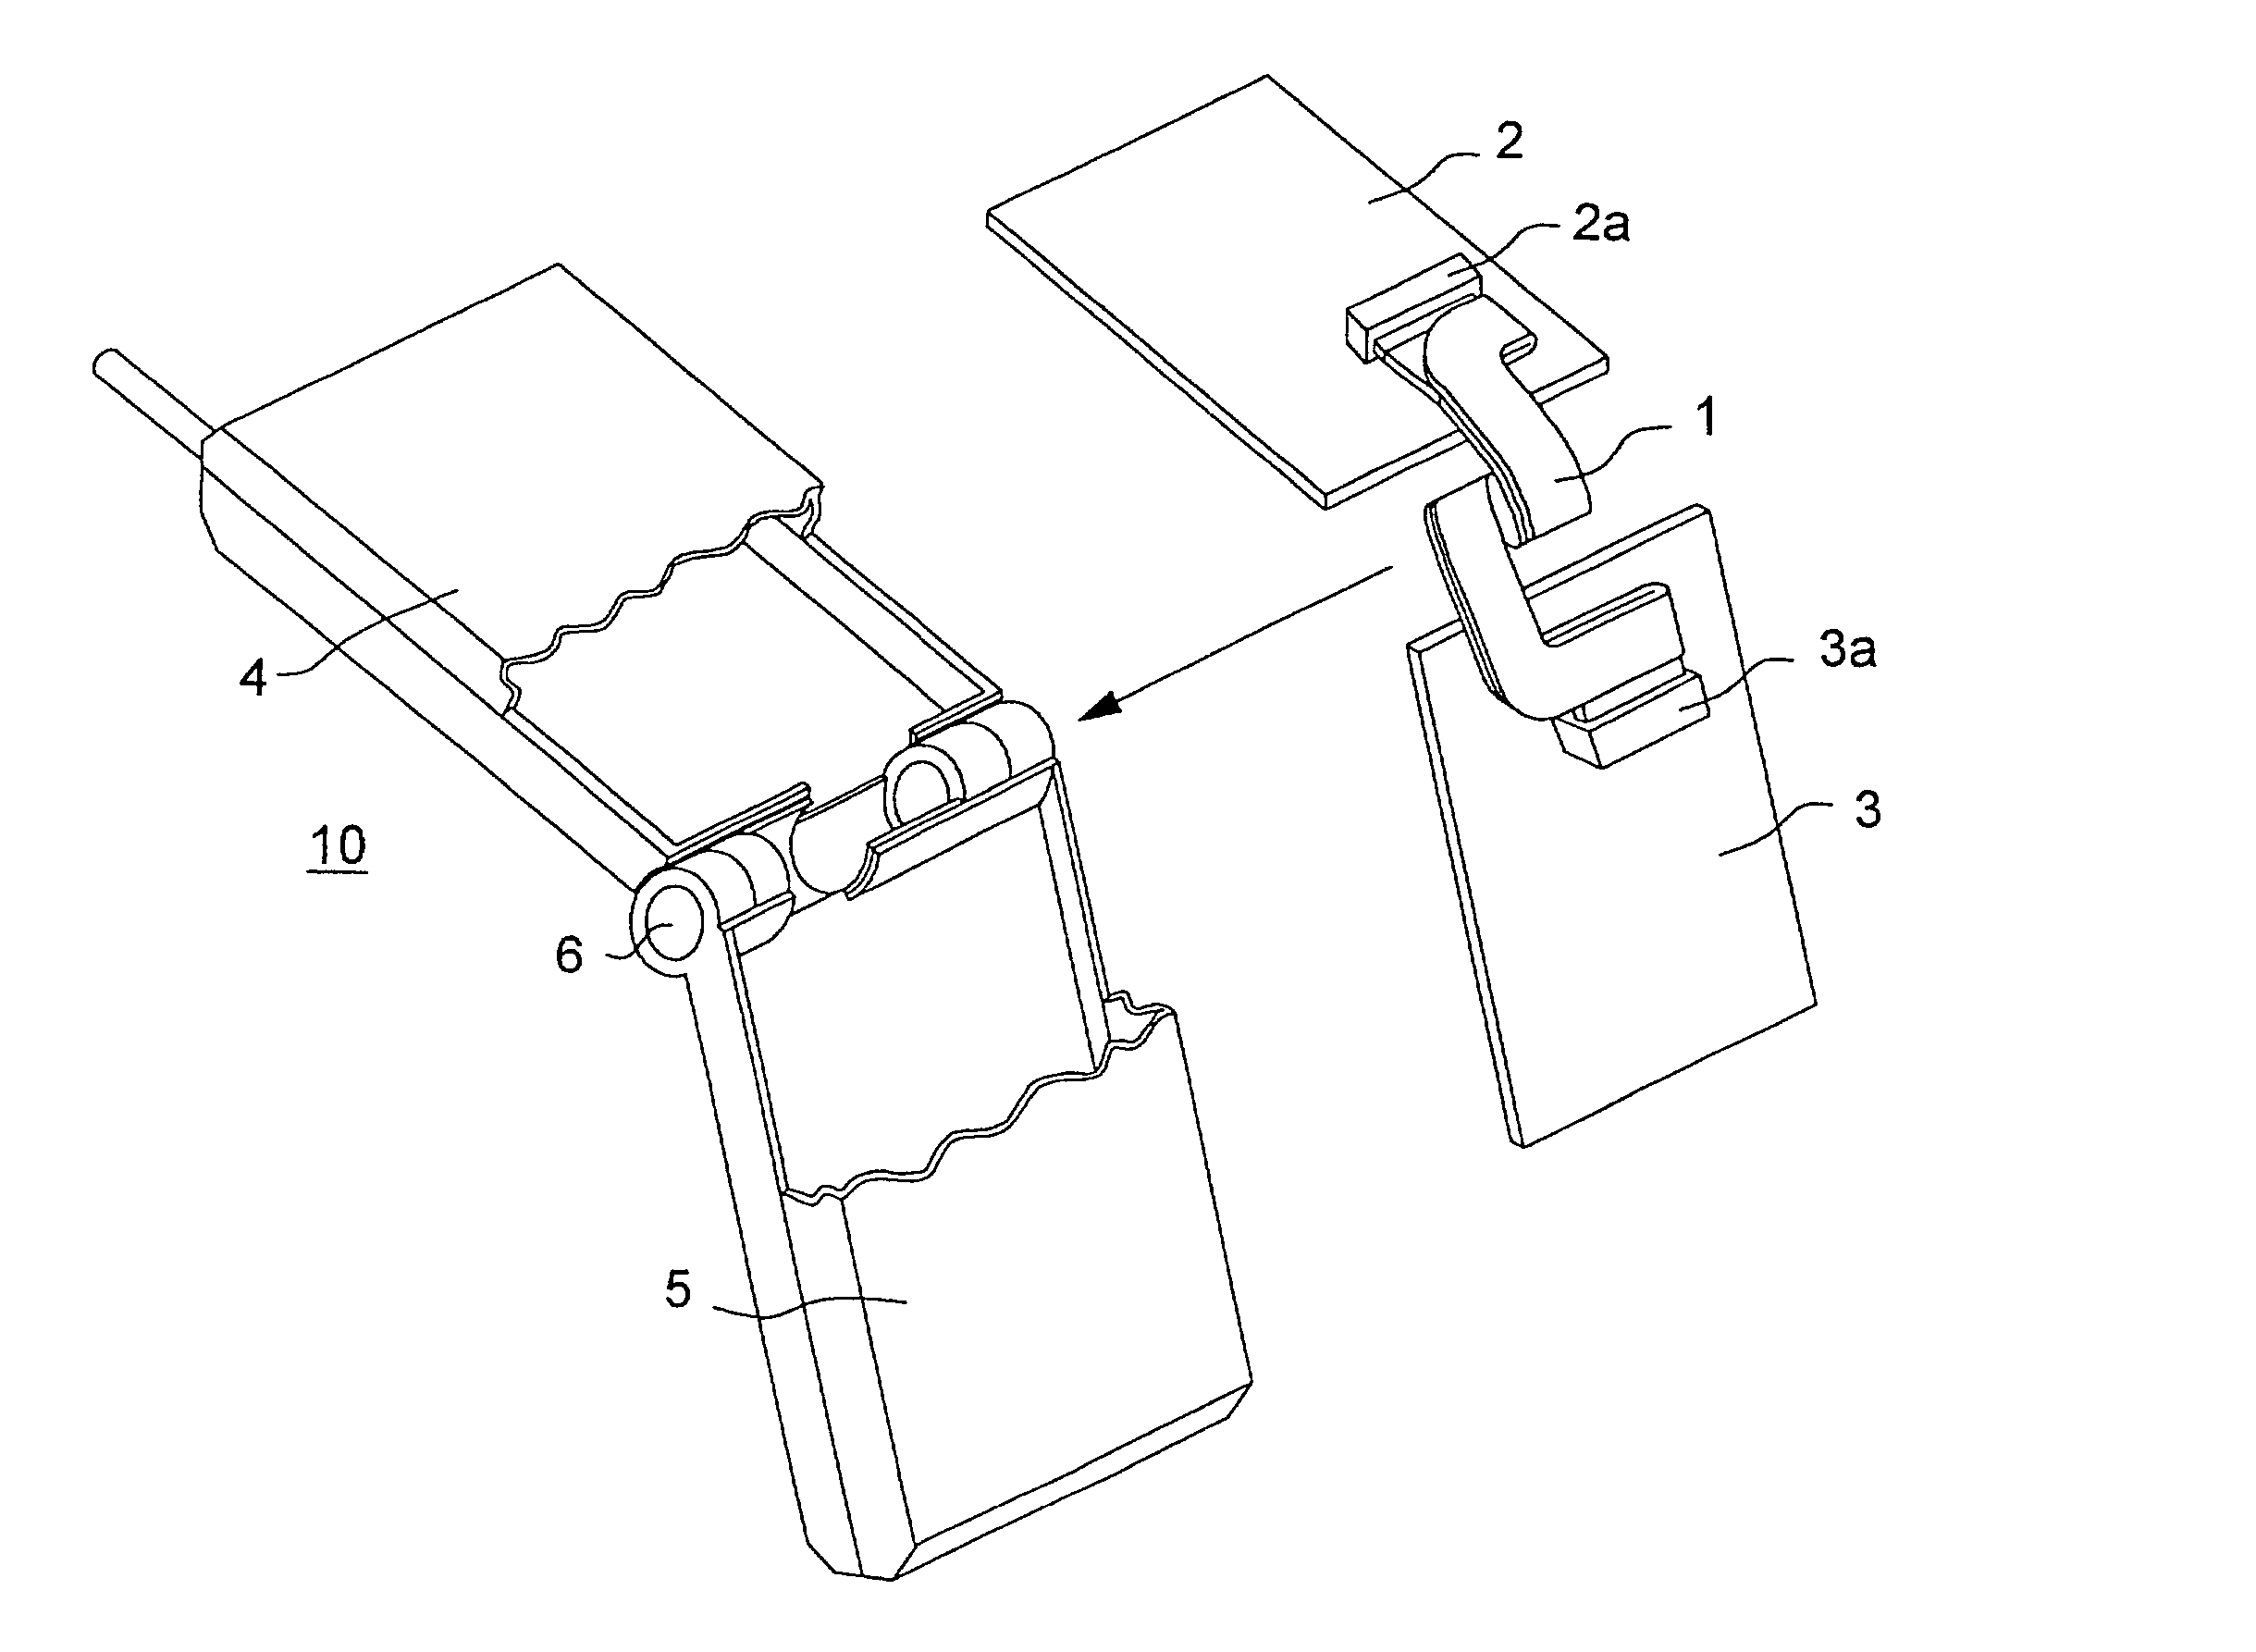 Flexible printed circuit board and foldable cell phone terminal